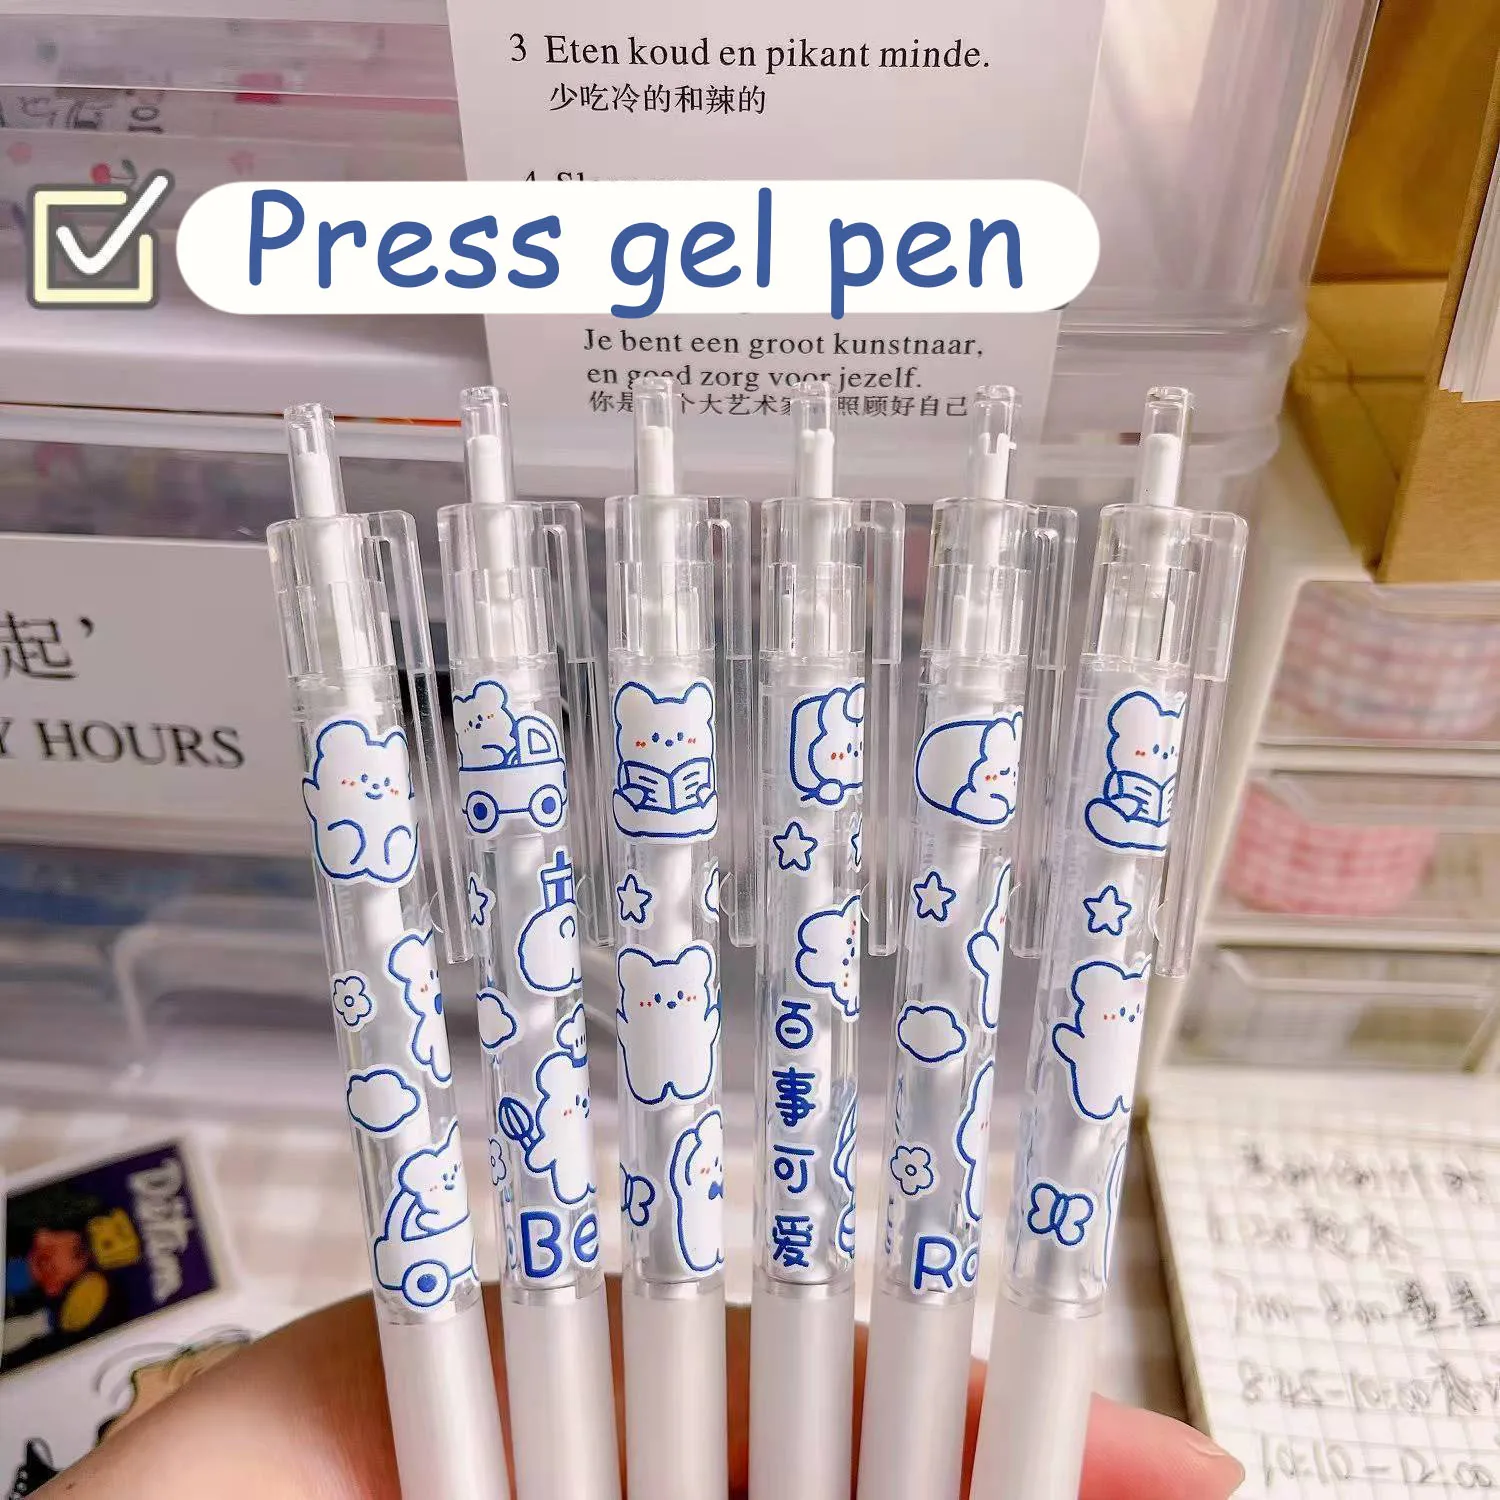 

1/3pc 0.5mm Kawaii Black Push Gel Pen Cute Signing Pen Student Office Stationery School Supplies Gift Wholesale